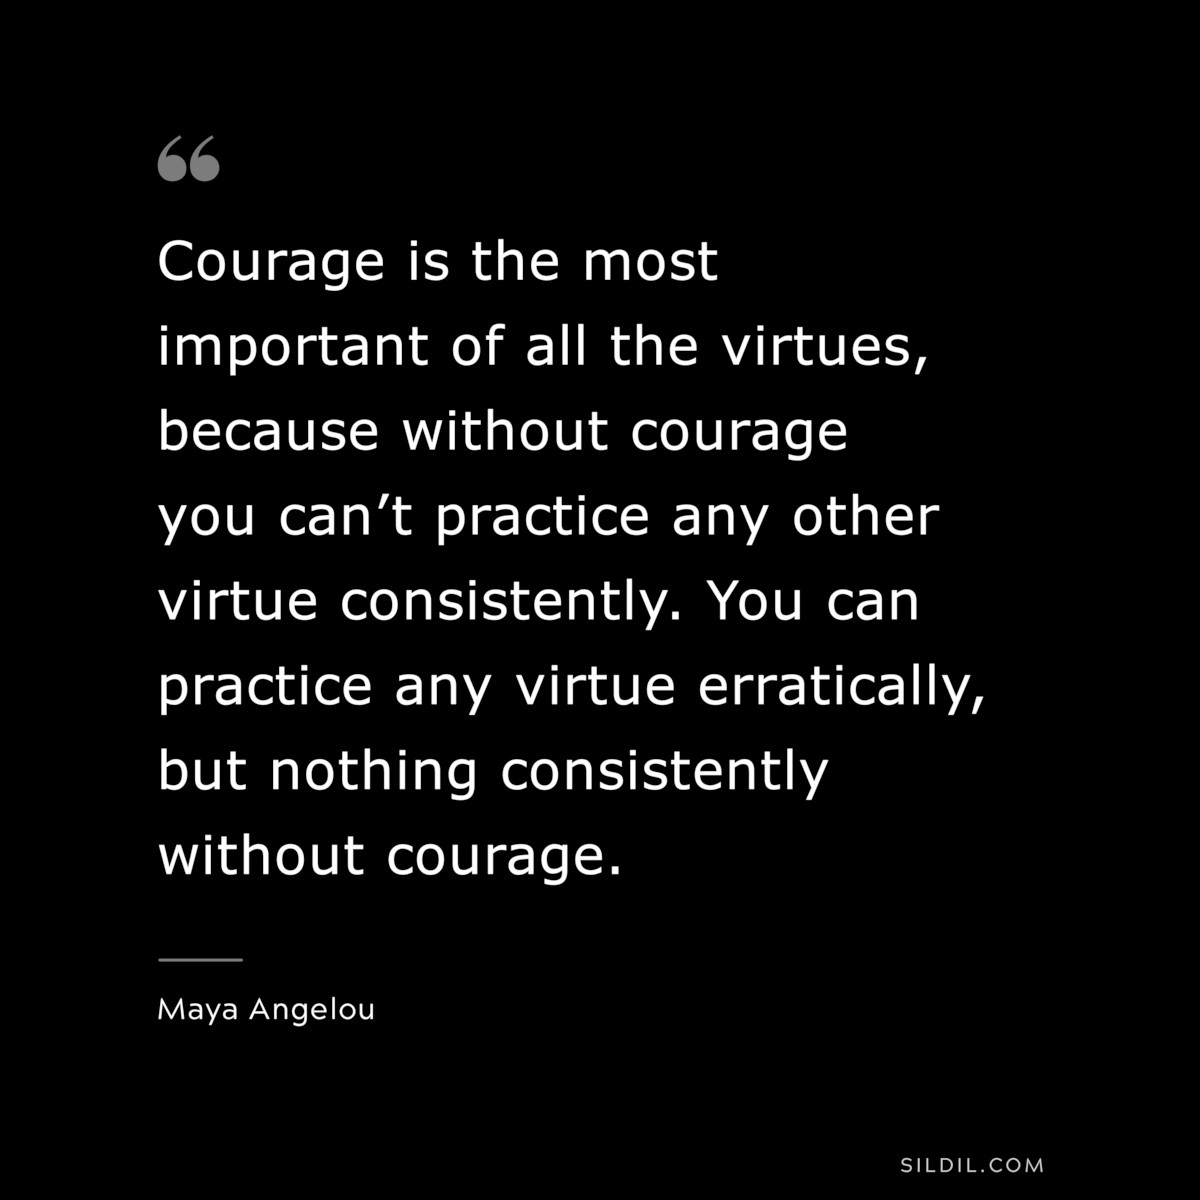 Courage is the most important of all the virtues, because without courage you can’t practice any other virtue consistently. You can practice any virtue erratically, but nothing consistently without courage. ― Maya Angelou